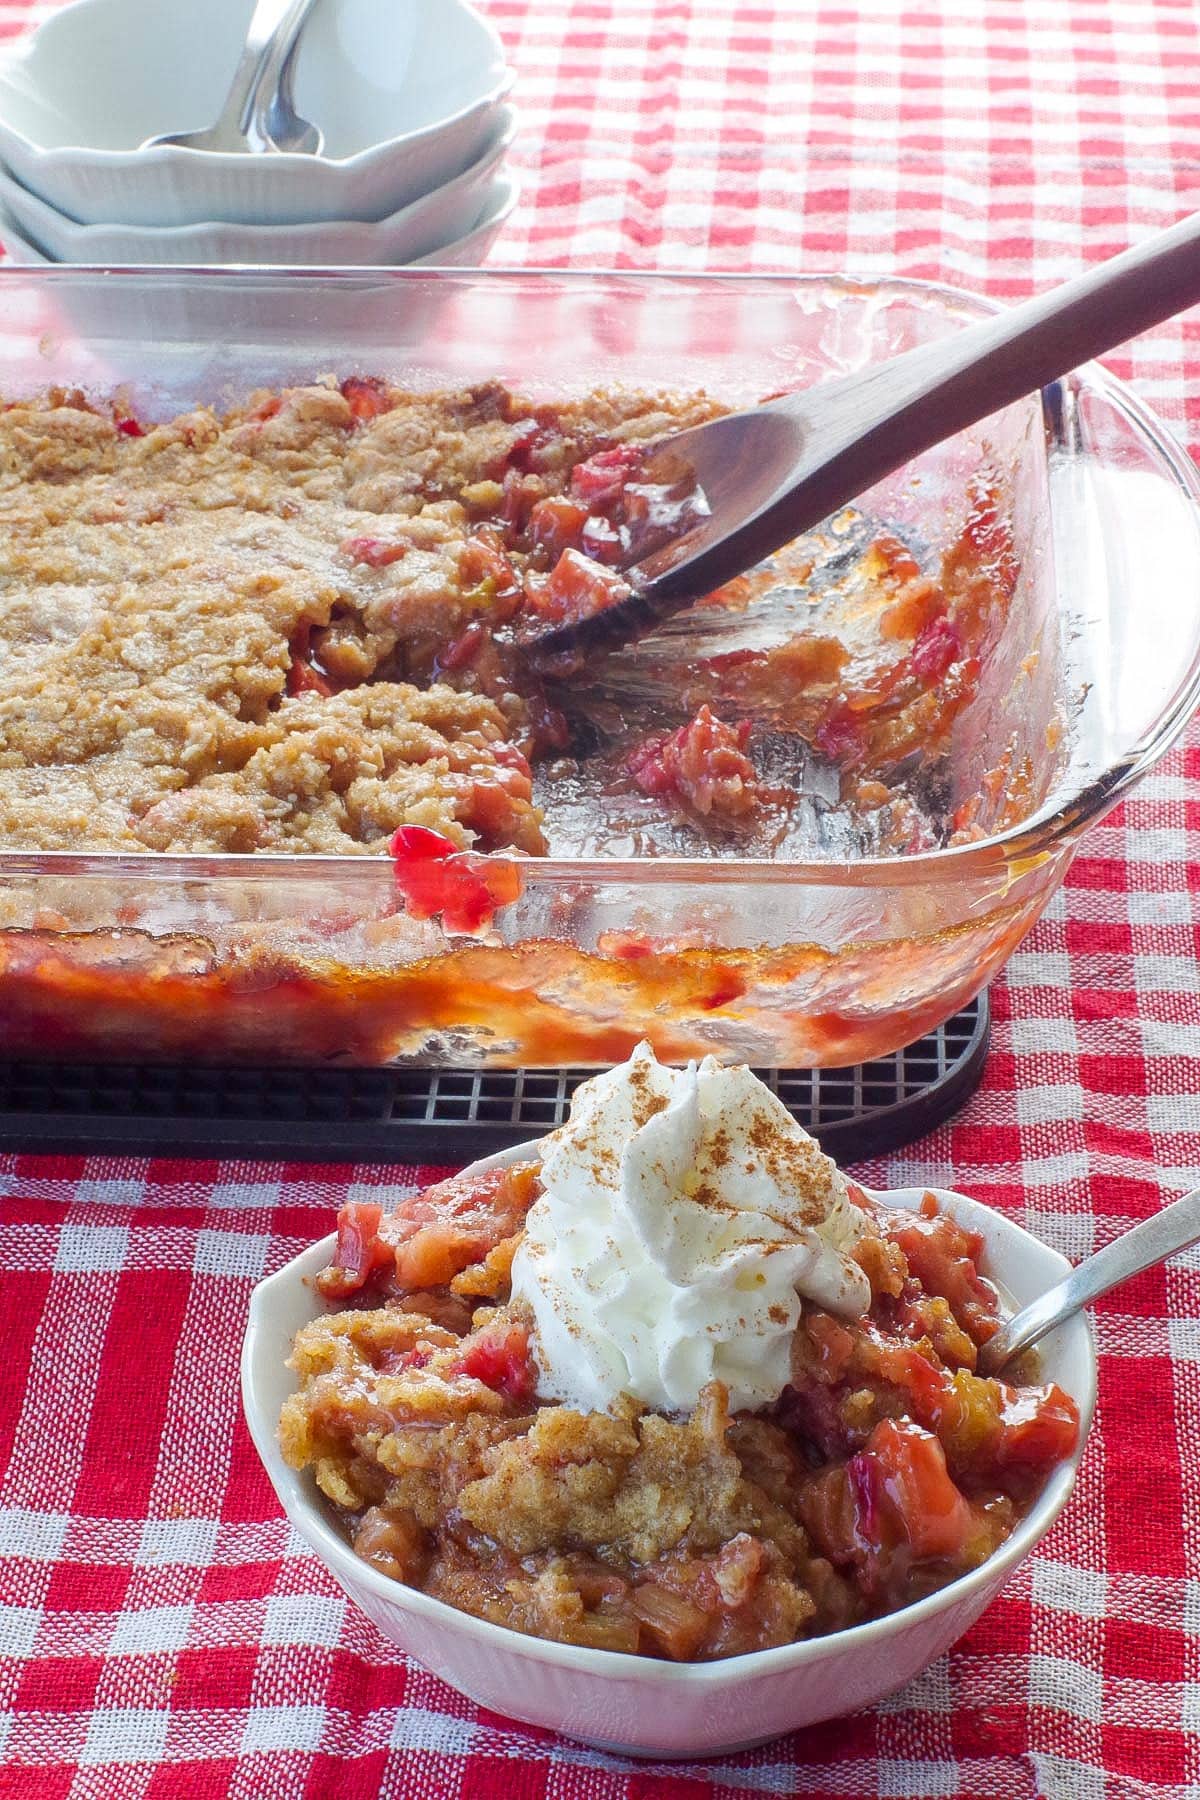 rhubarb crumble topped with whipped cream,  in a white petal dish with a spoon and a glass pan of more rhubarb crisp in the background